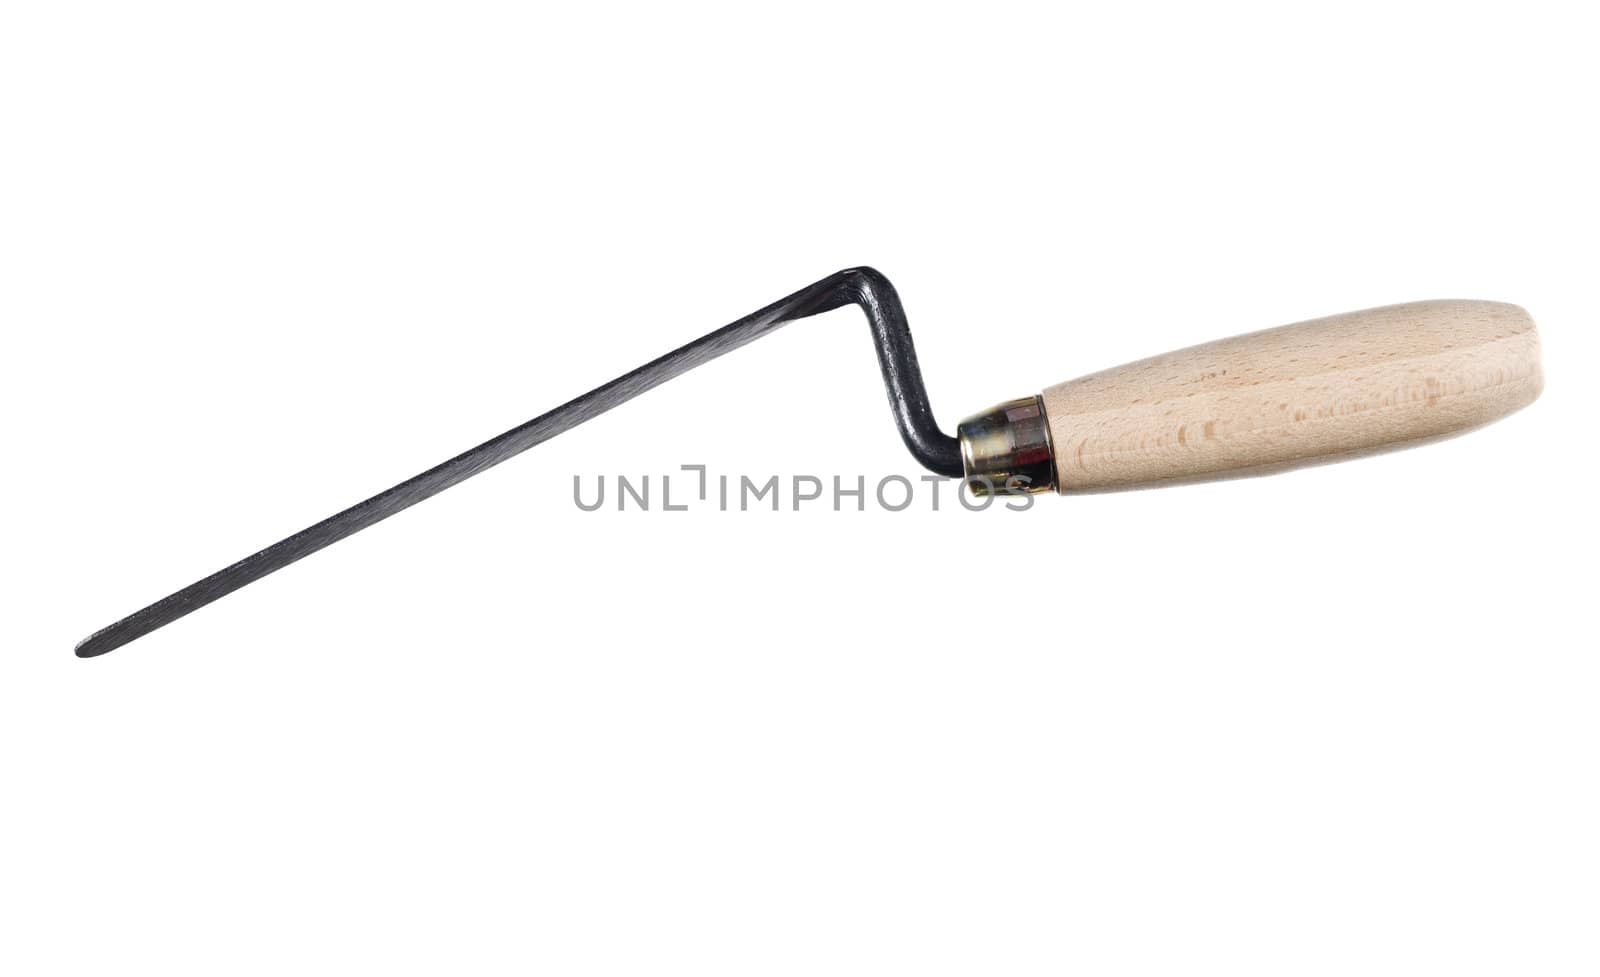 Work tool isolated on a white background